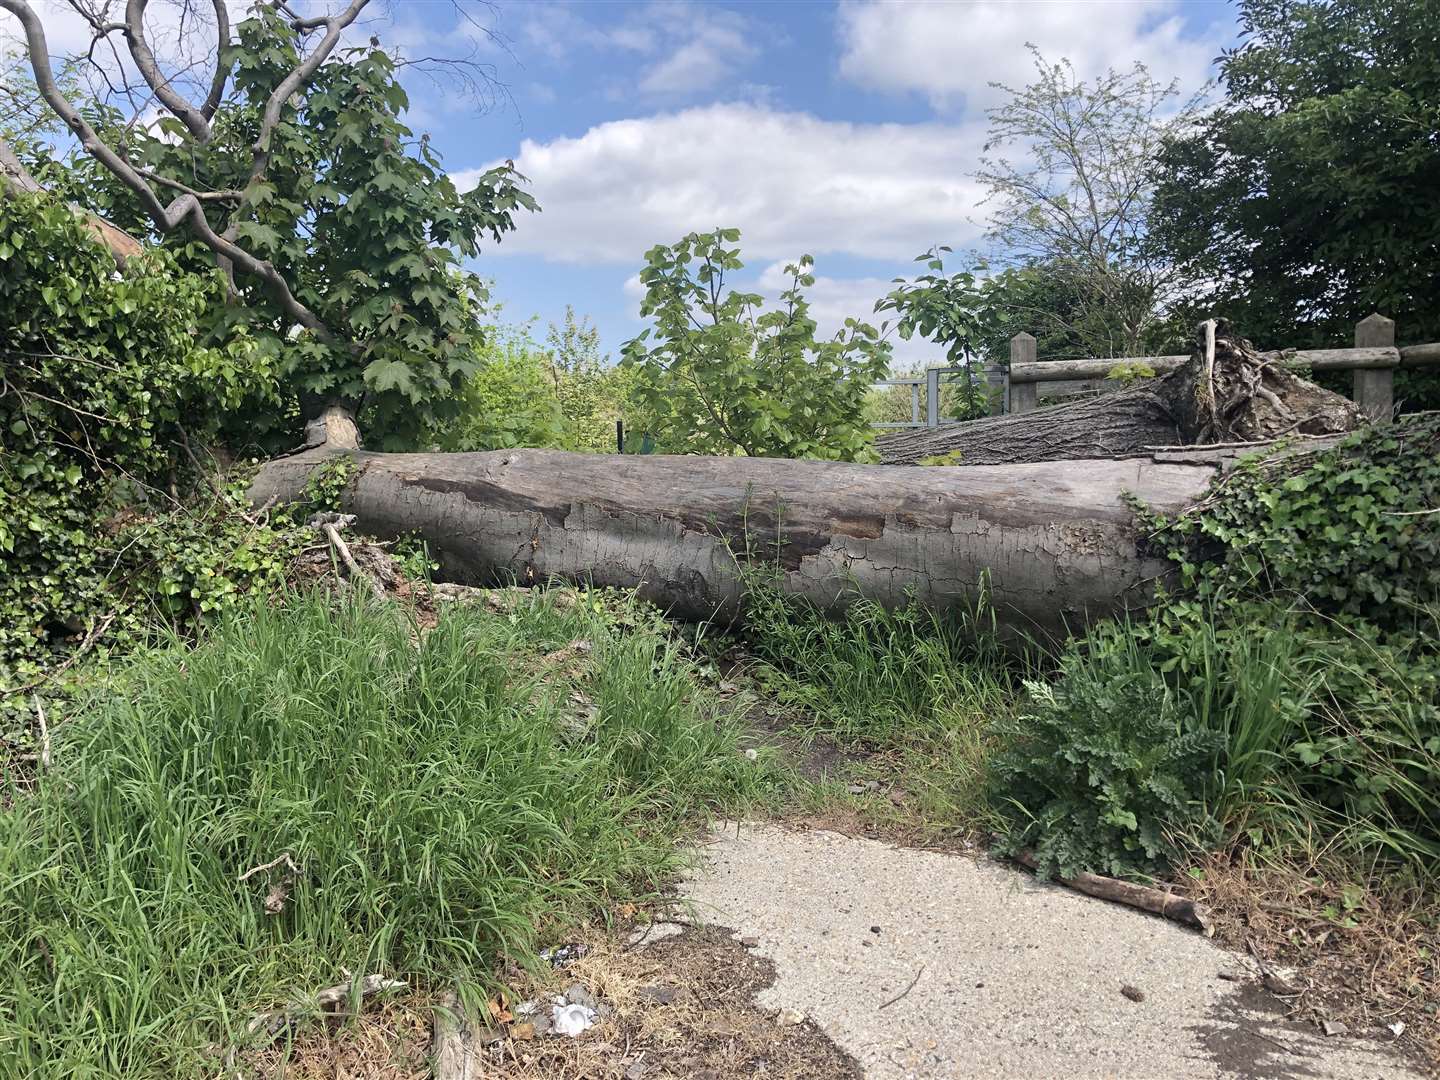 The tree is believed to have fallen down during a storm in 2020